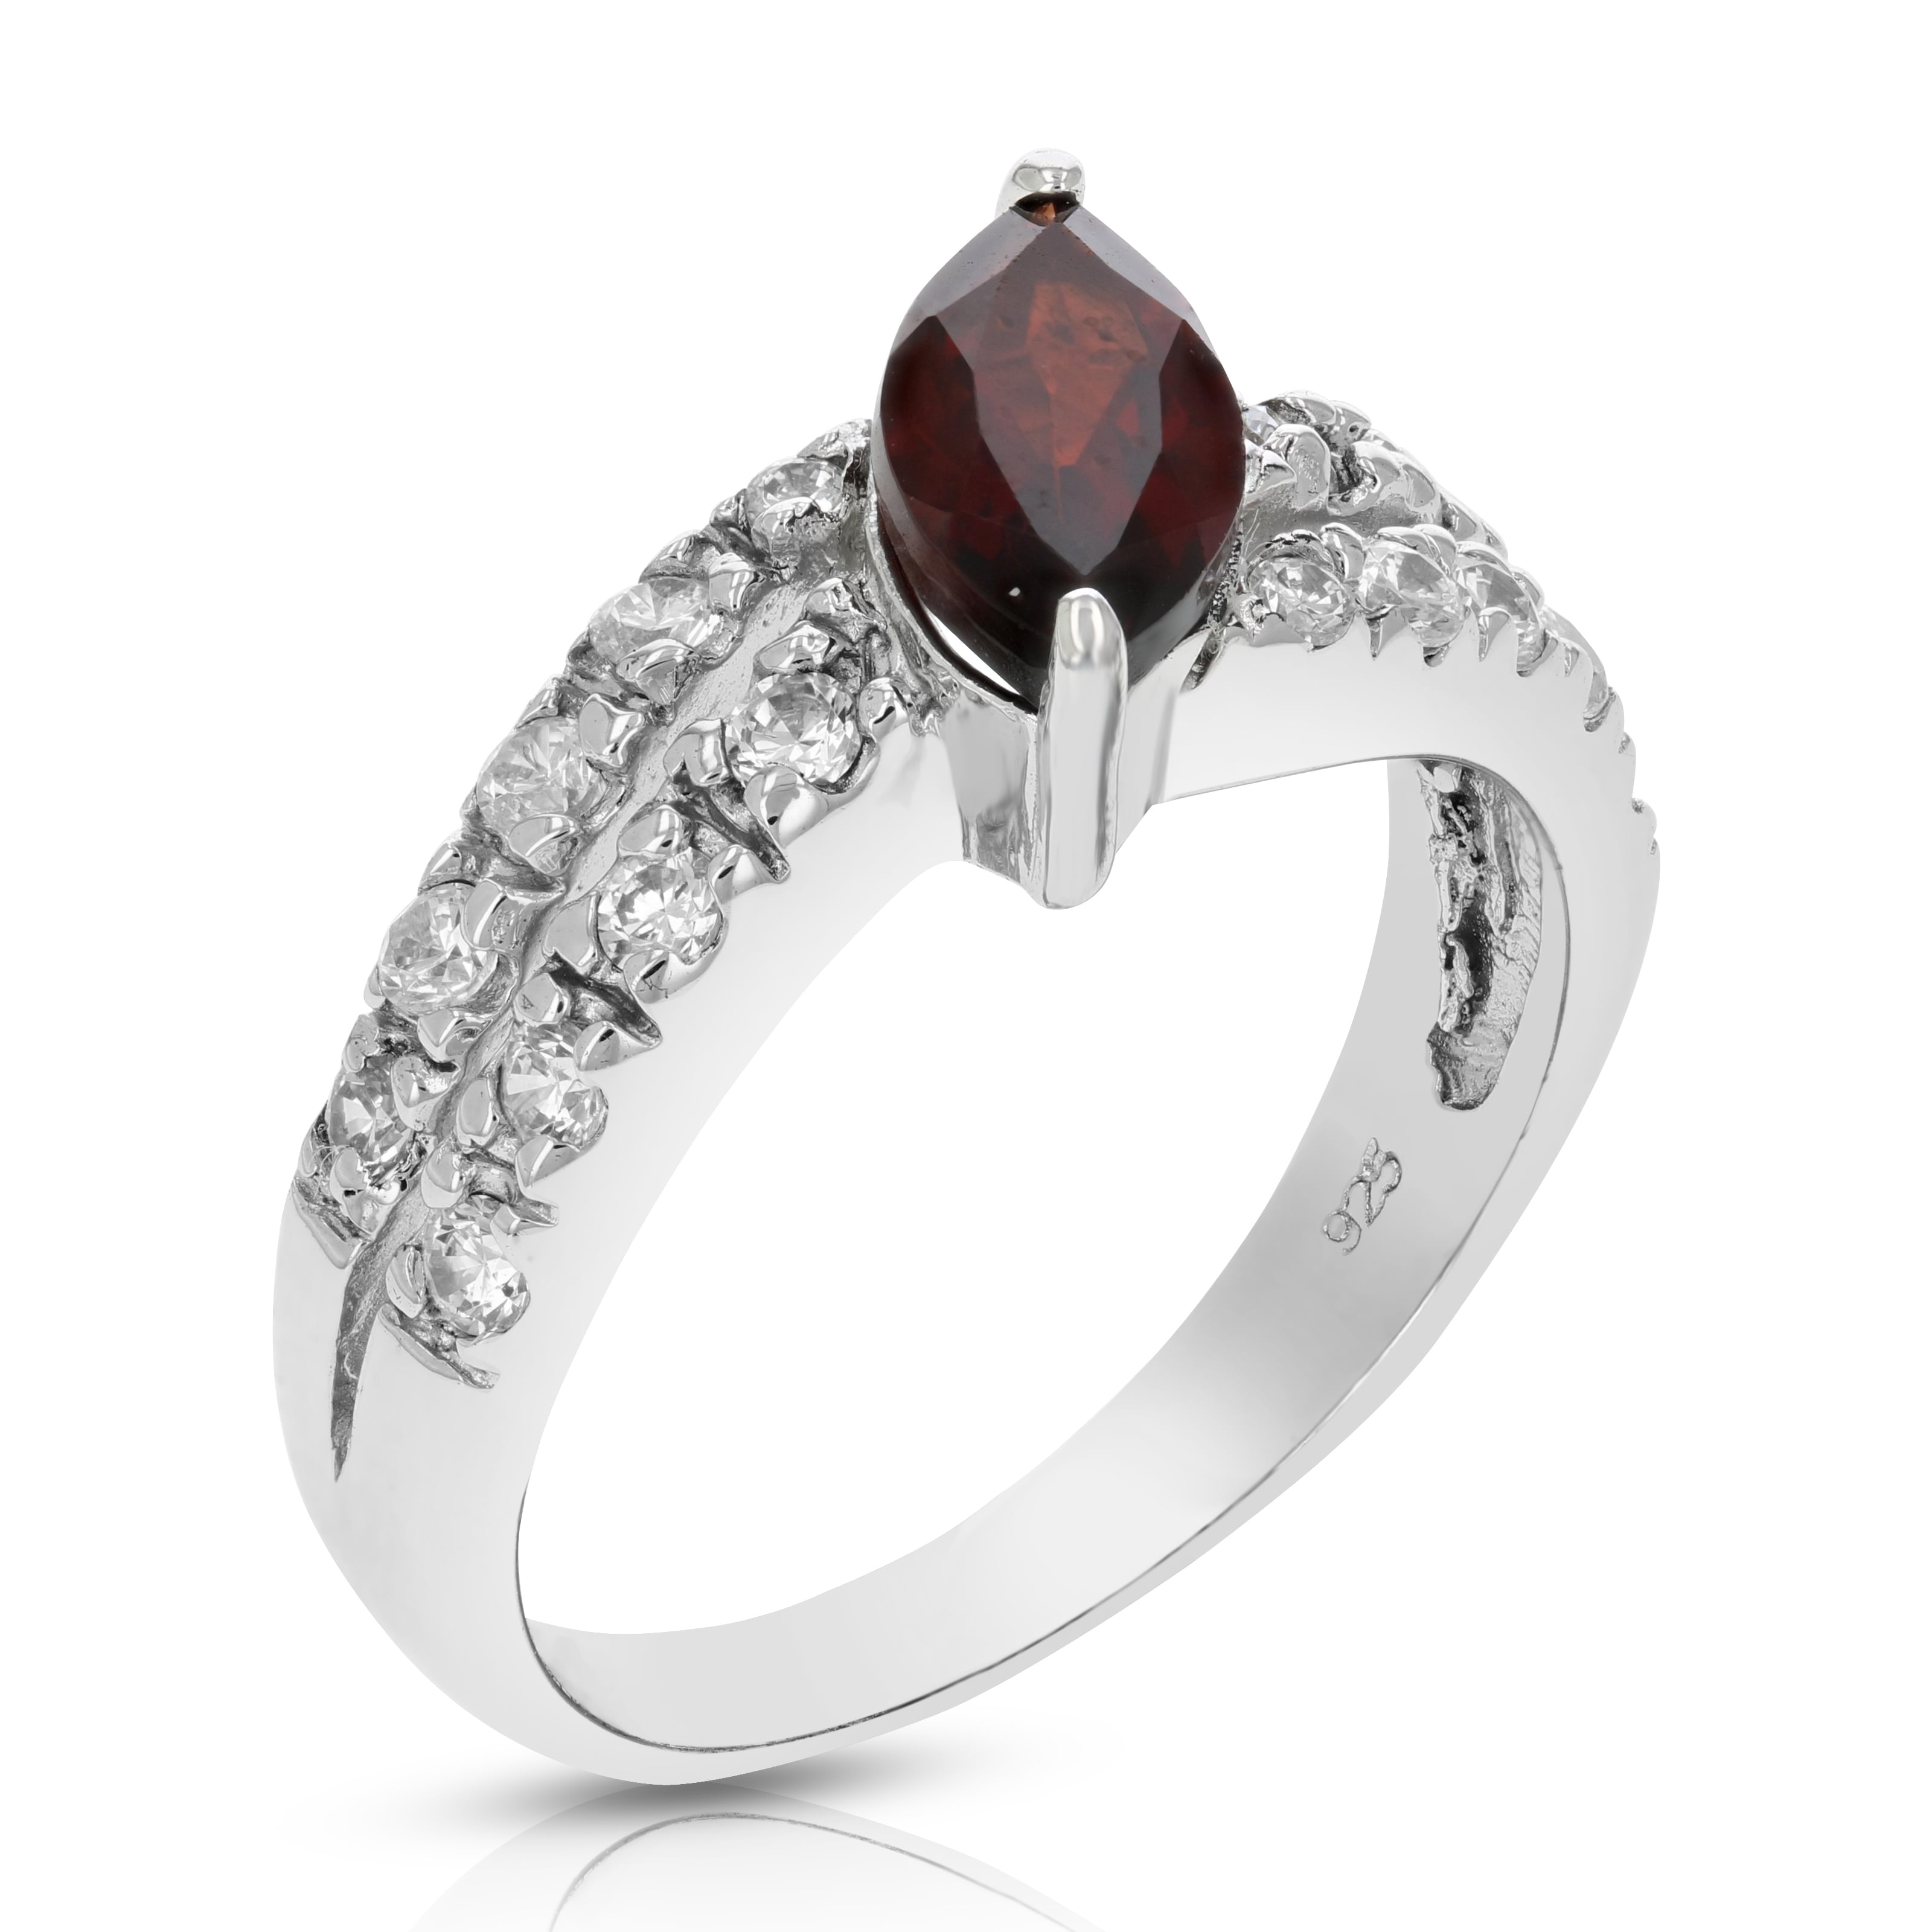 Genuine Garnet 925 Silver Ring For Men Cat Style Marquise Birthstone January Size 4,5,6,7,8,9,10,11,12 